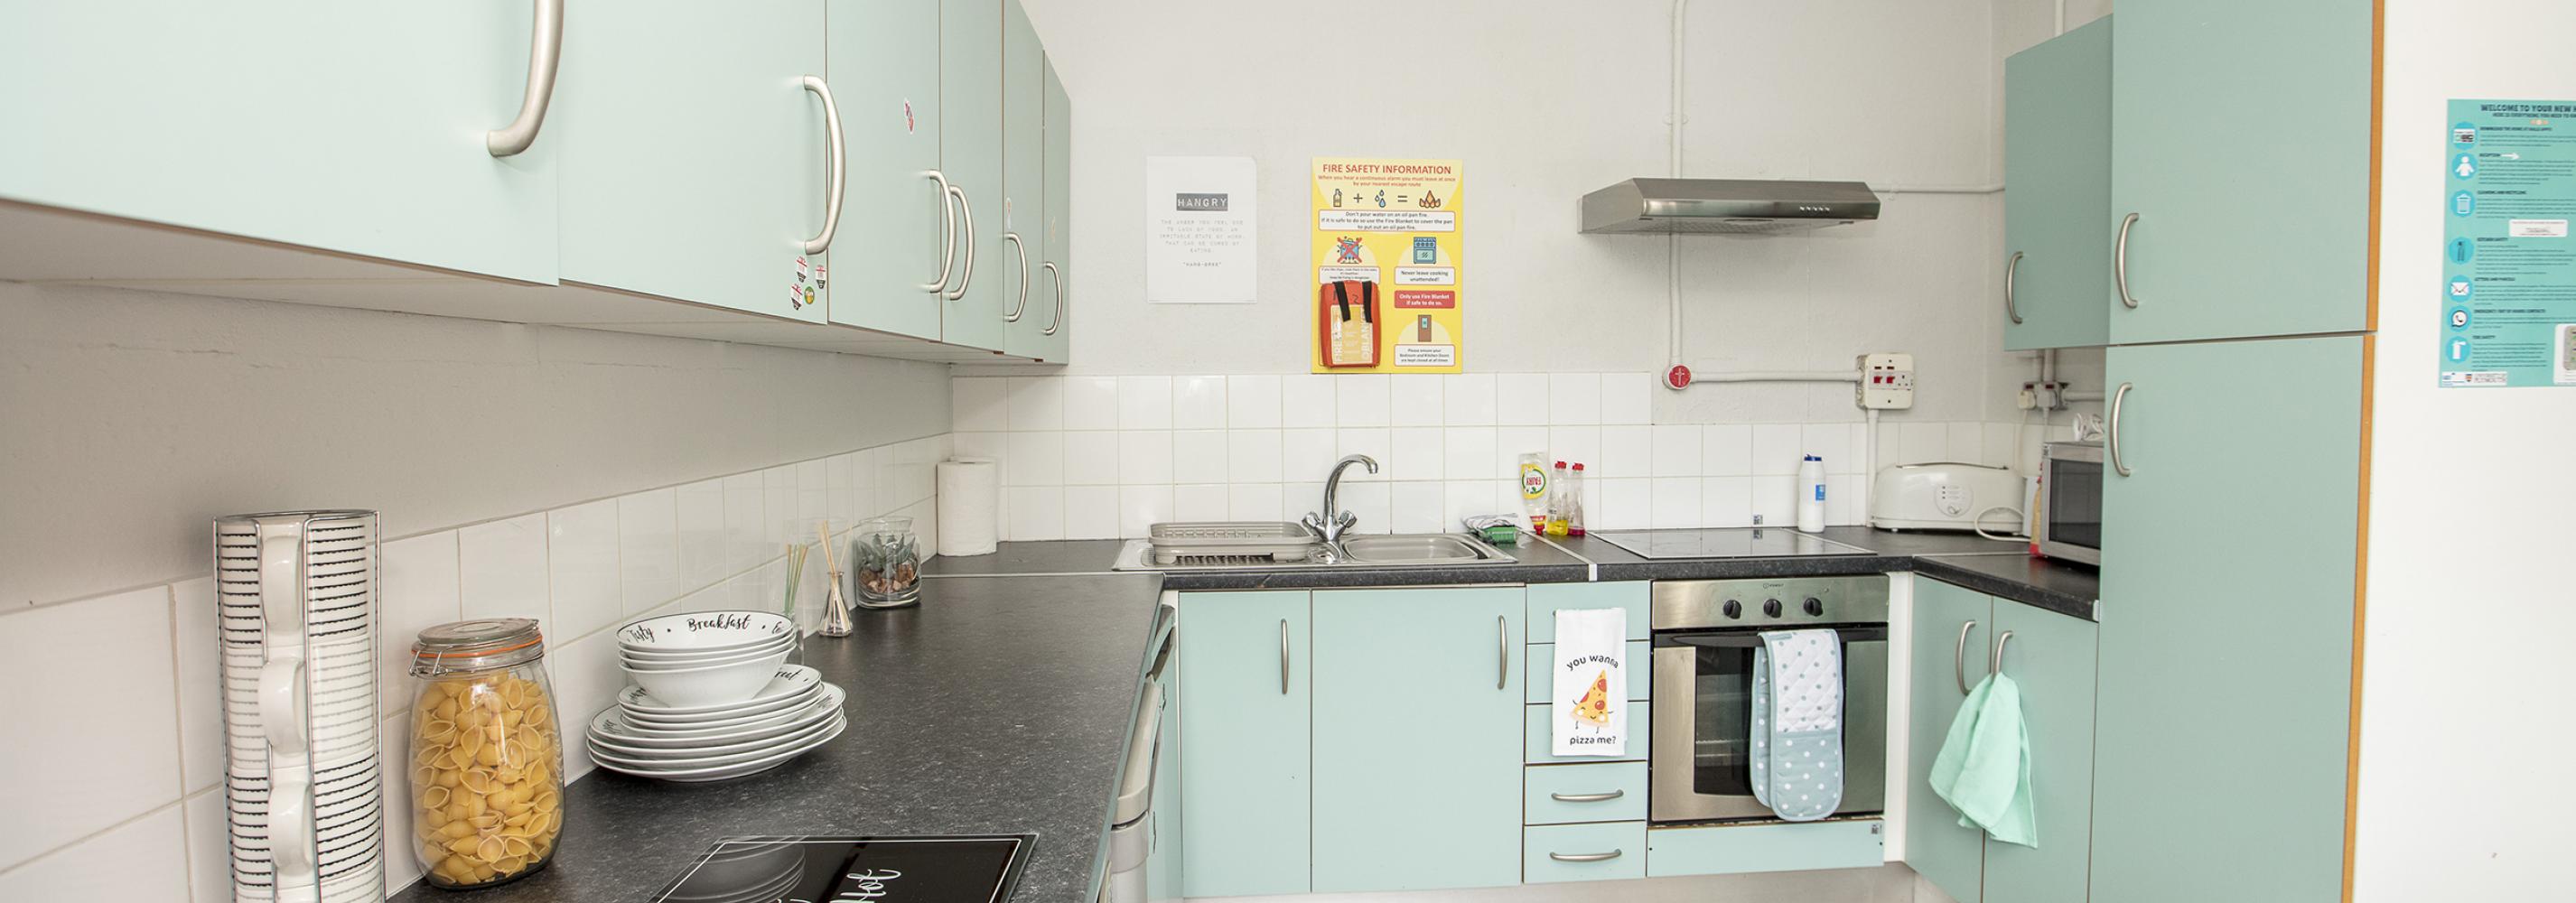 Kitchenm extractor fan, teal coloured cupboards, oven, hob, sink, toaster, fire blanket